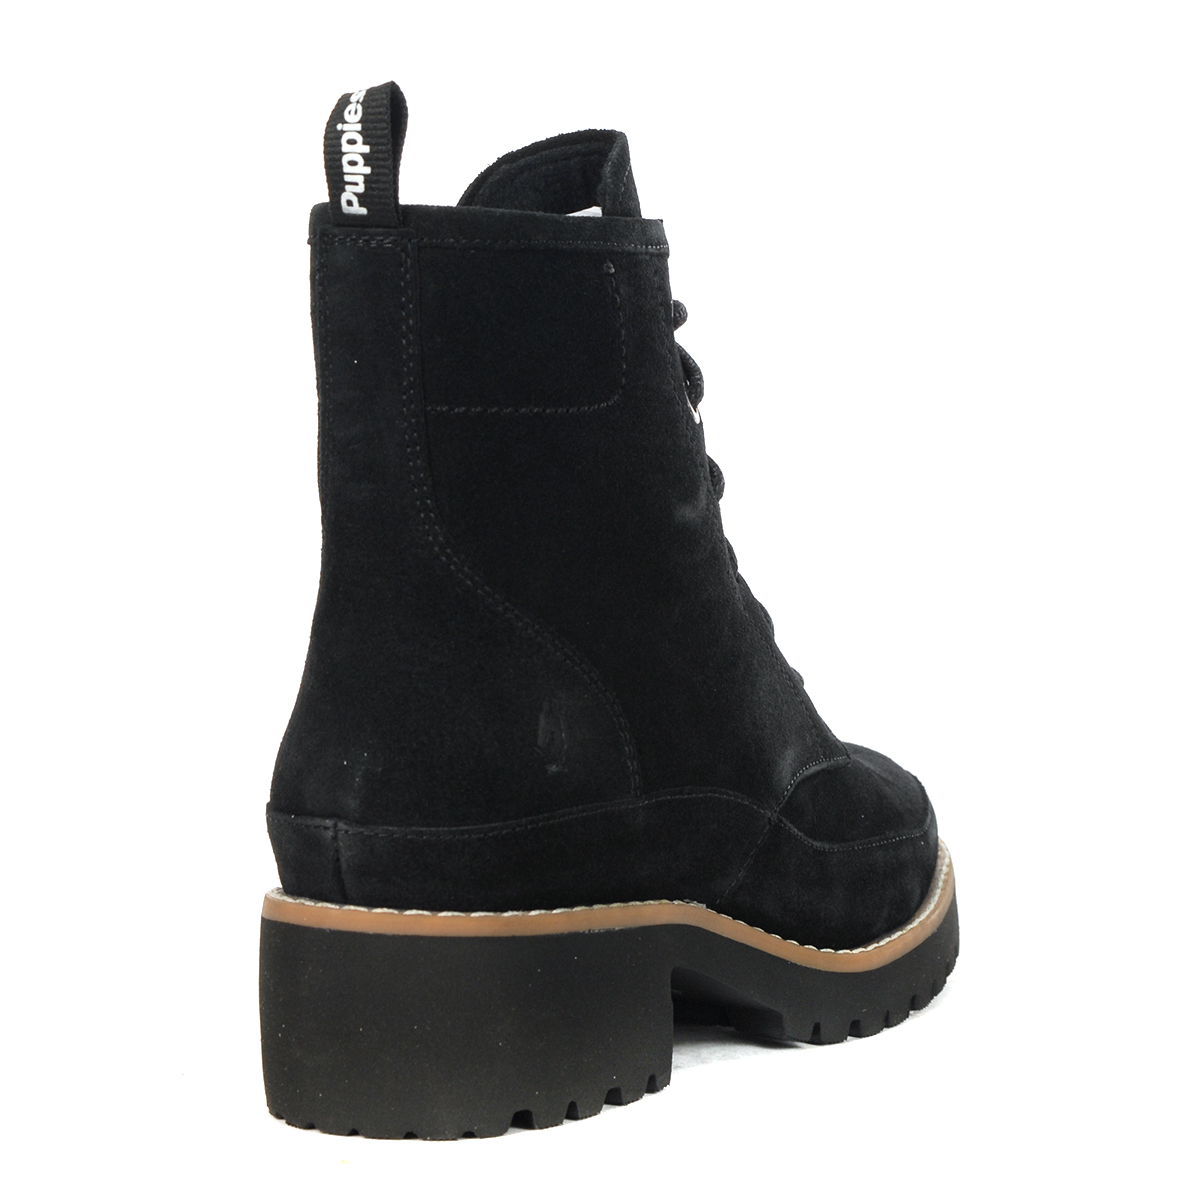 Hush Puppies Amelia Lace Bold Black Suede Lug Boots HW06865-001 